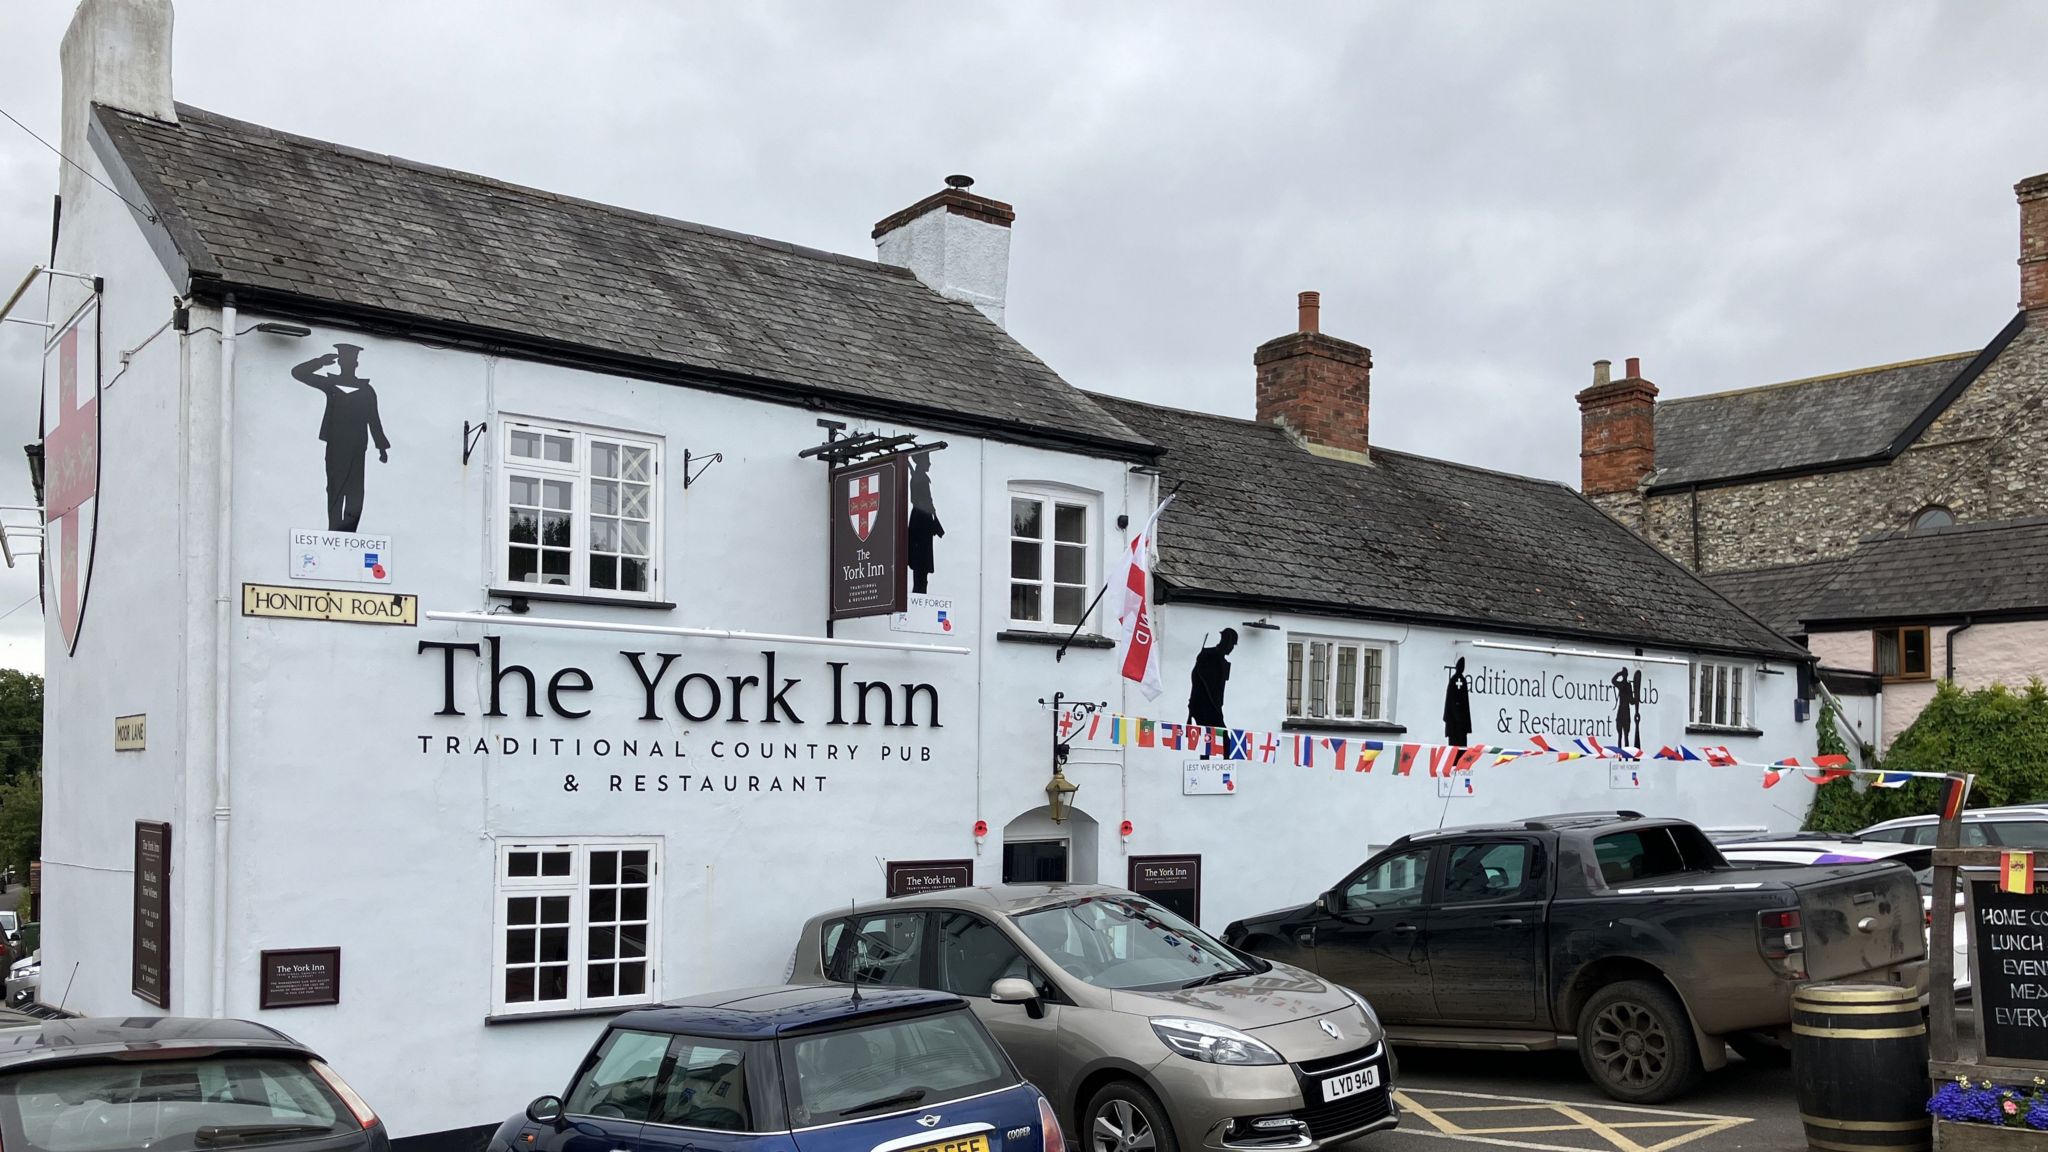 The York Inn building surrounded by cars and and adorned with WW1 imagery 